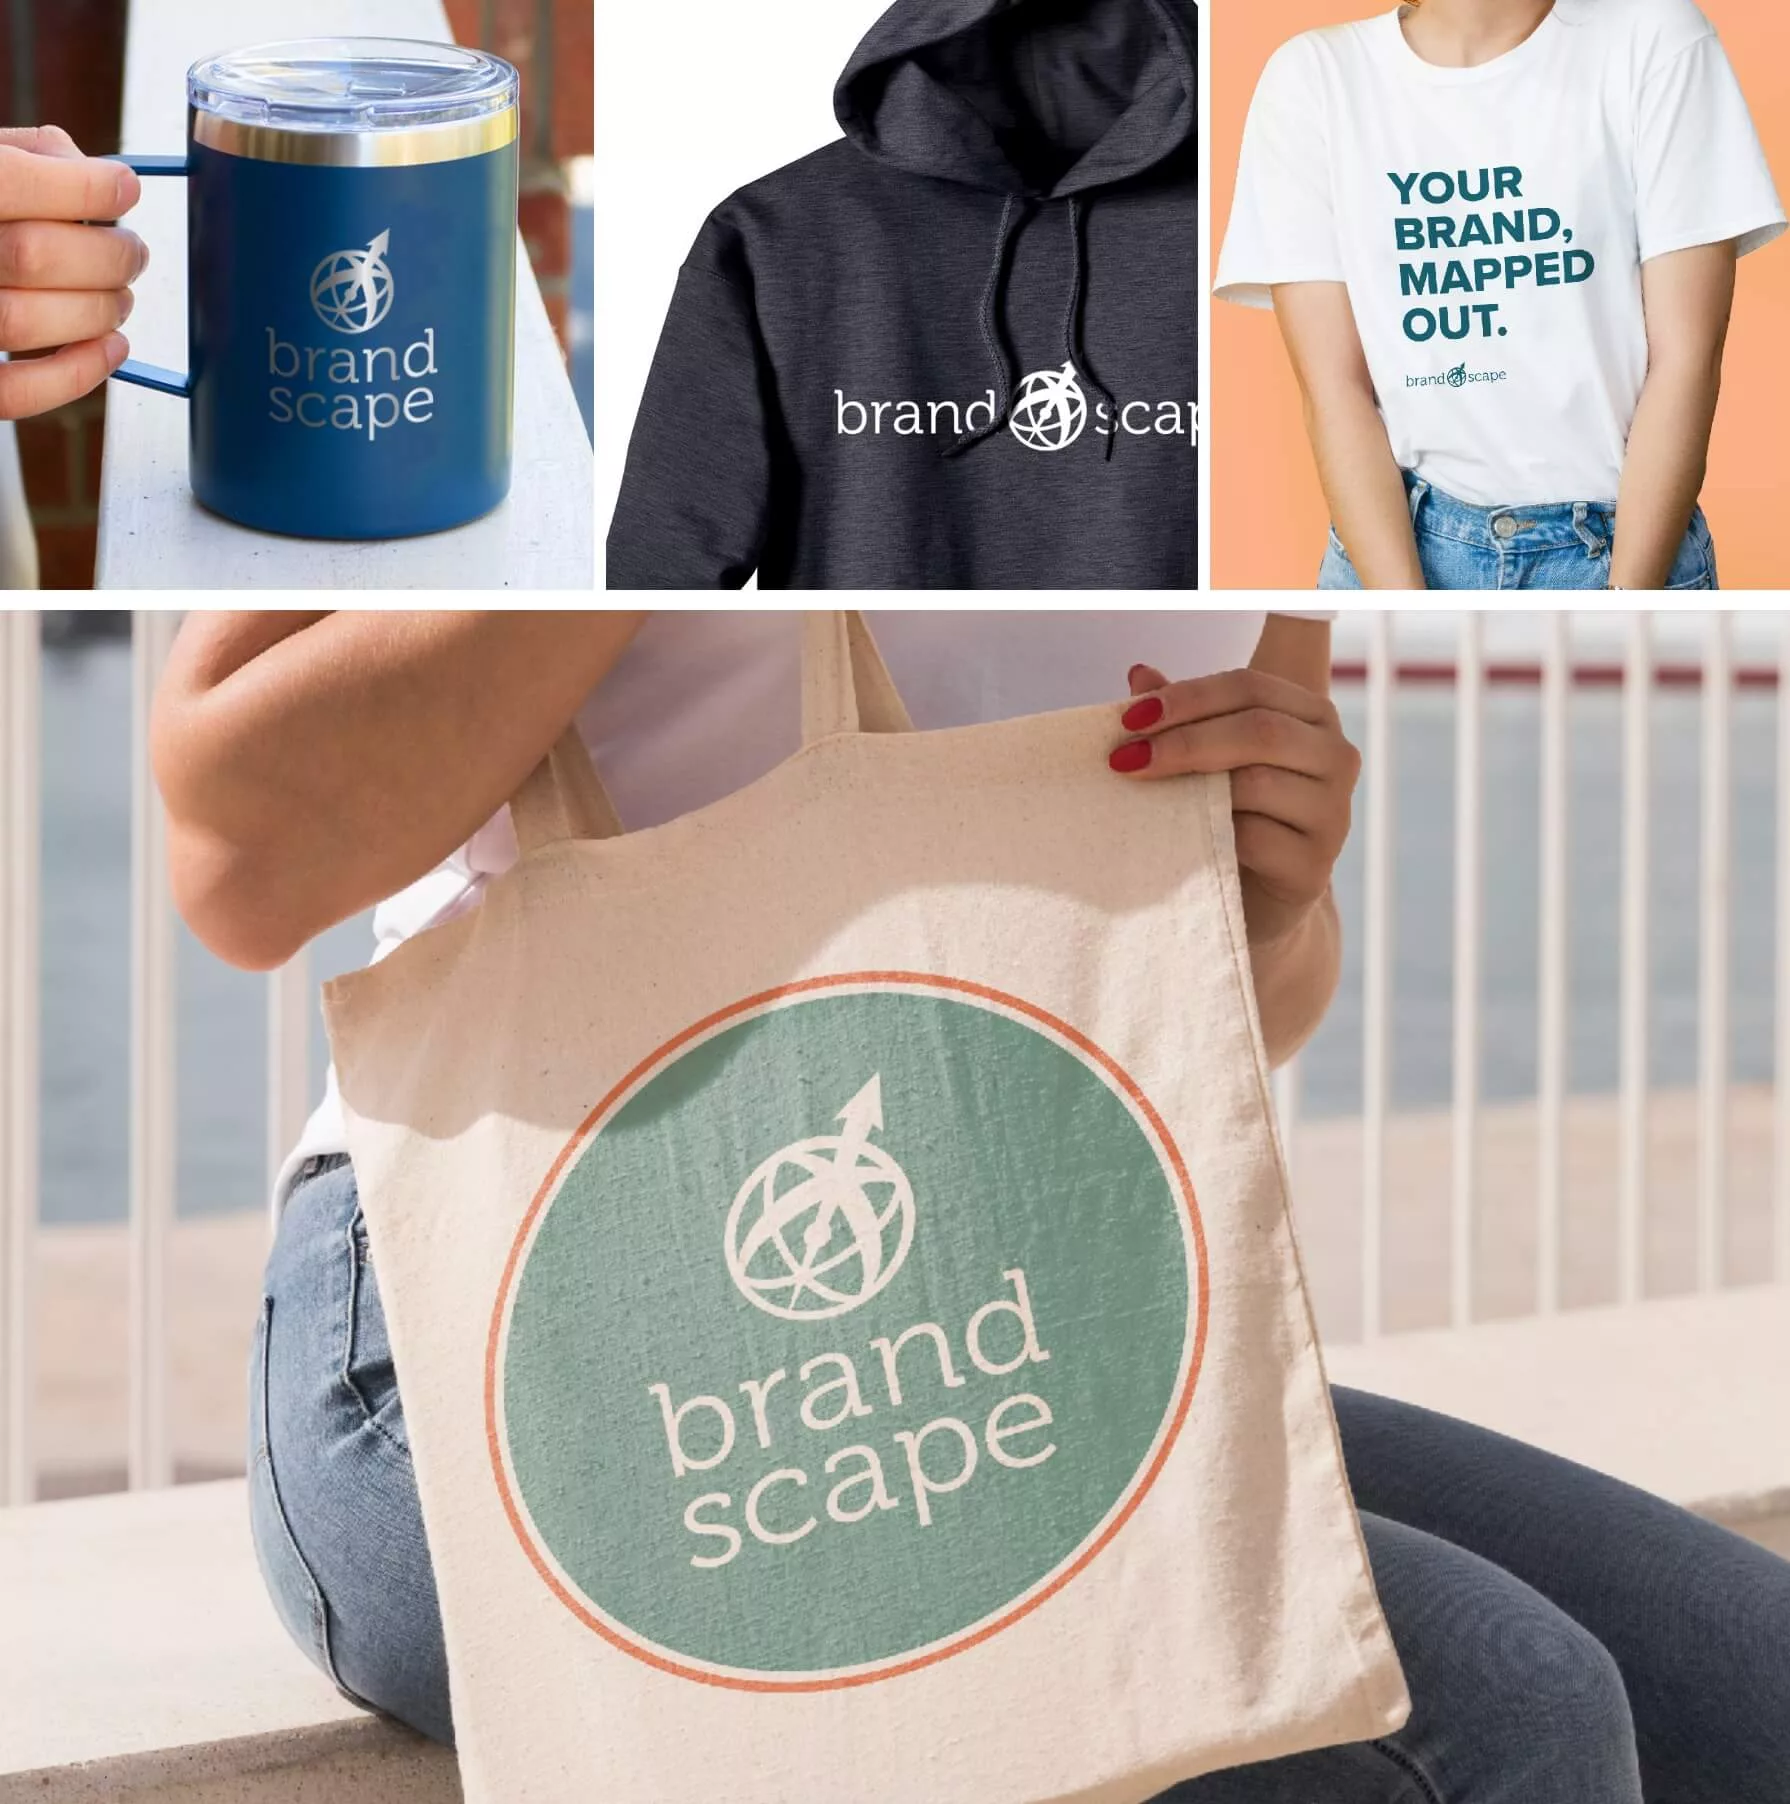 Printed promotional items by Brandscape